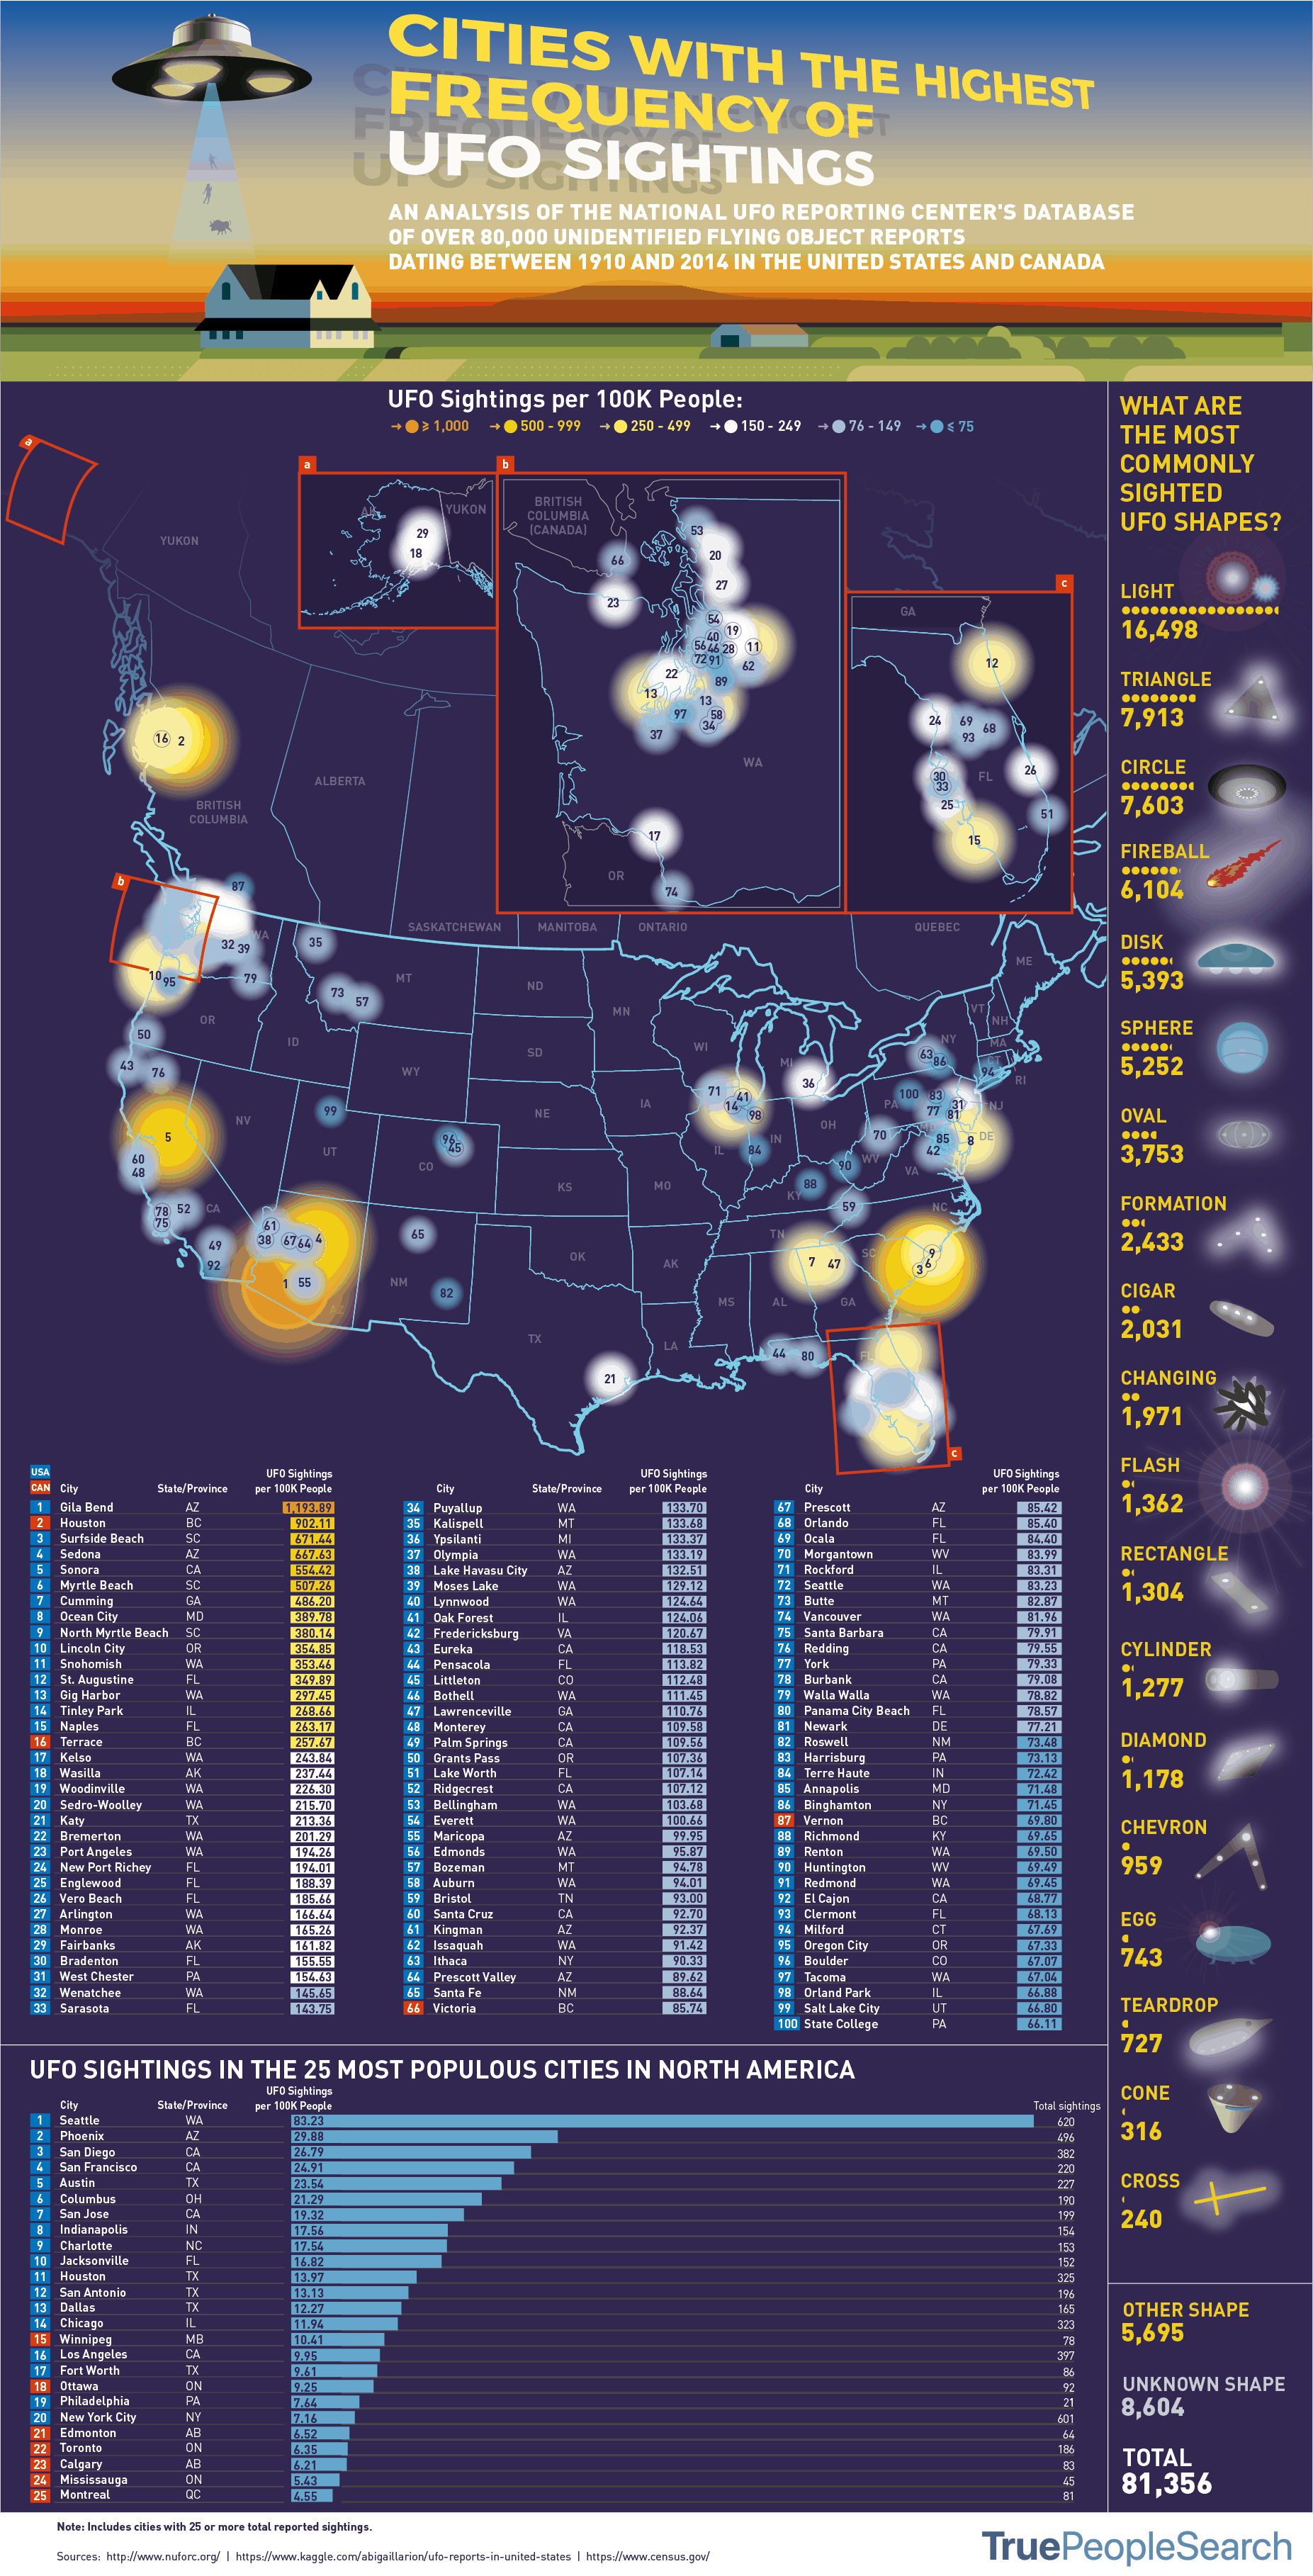 Here are the Cities With the Highest Frequency of UFO Sightings in North America